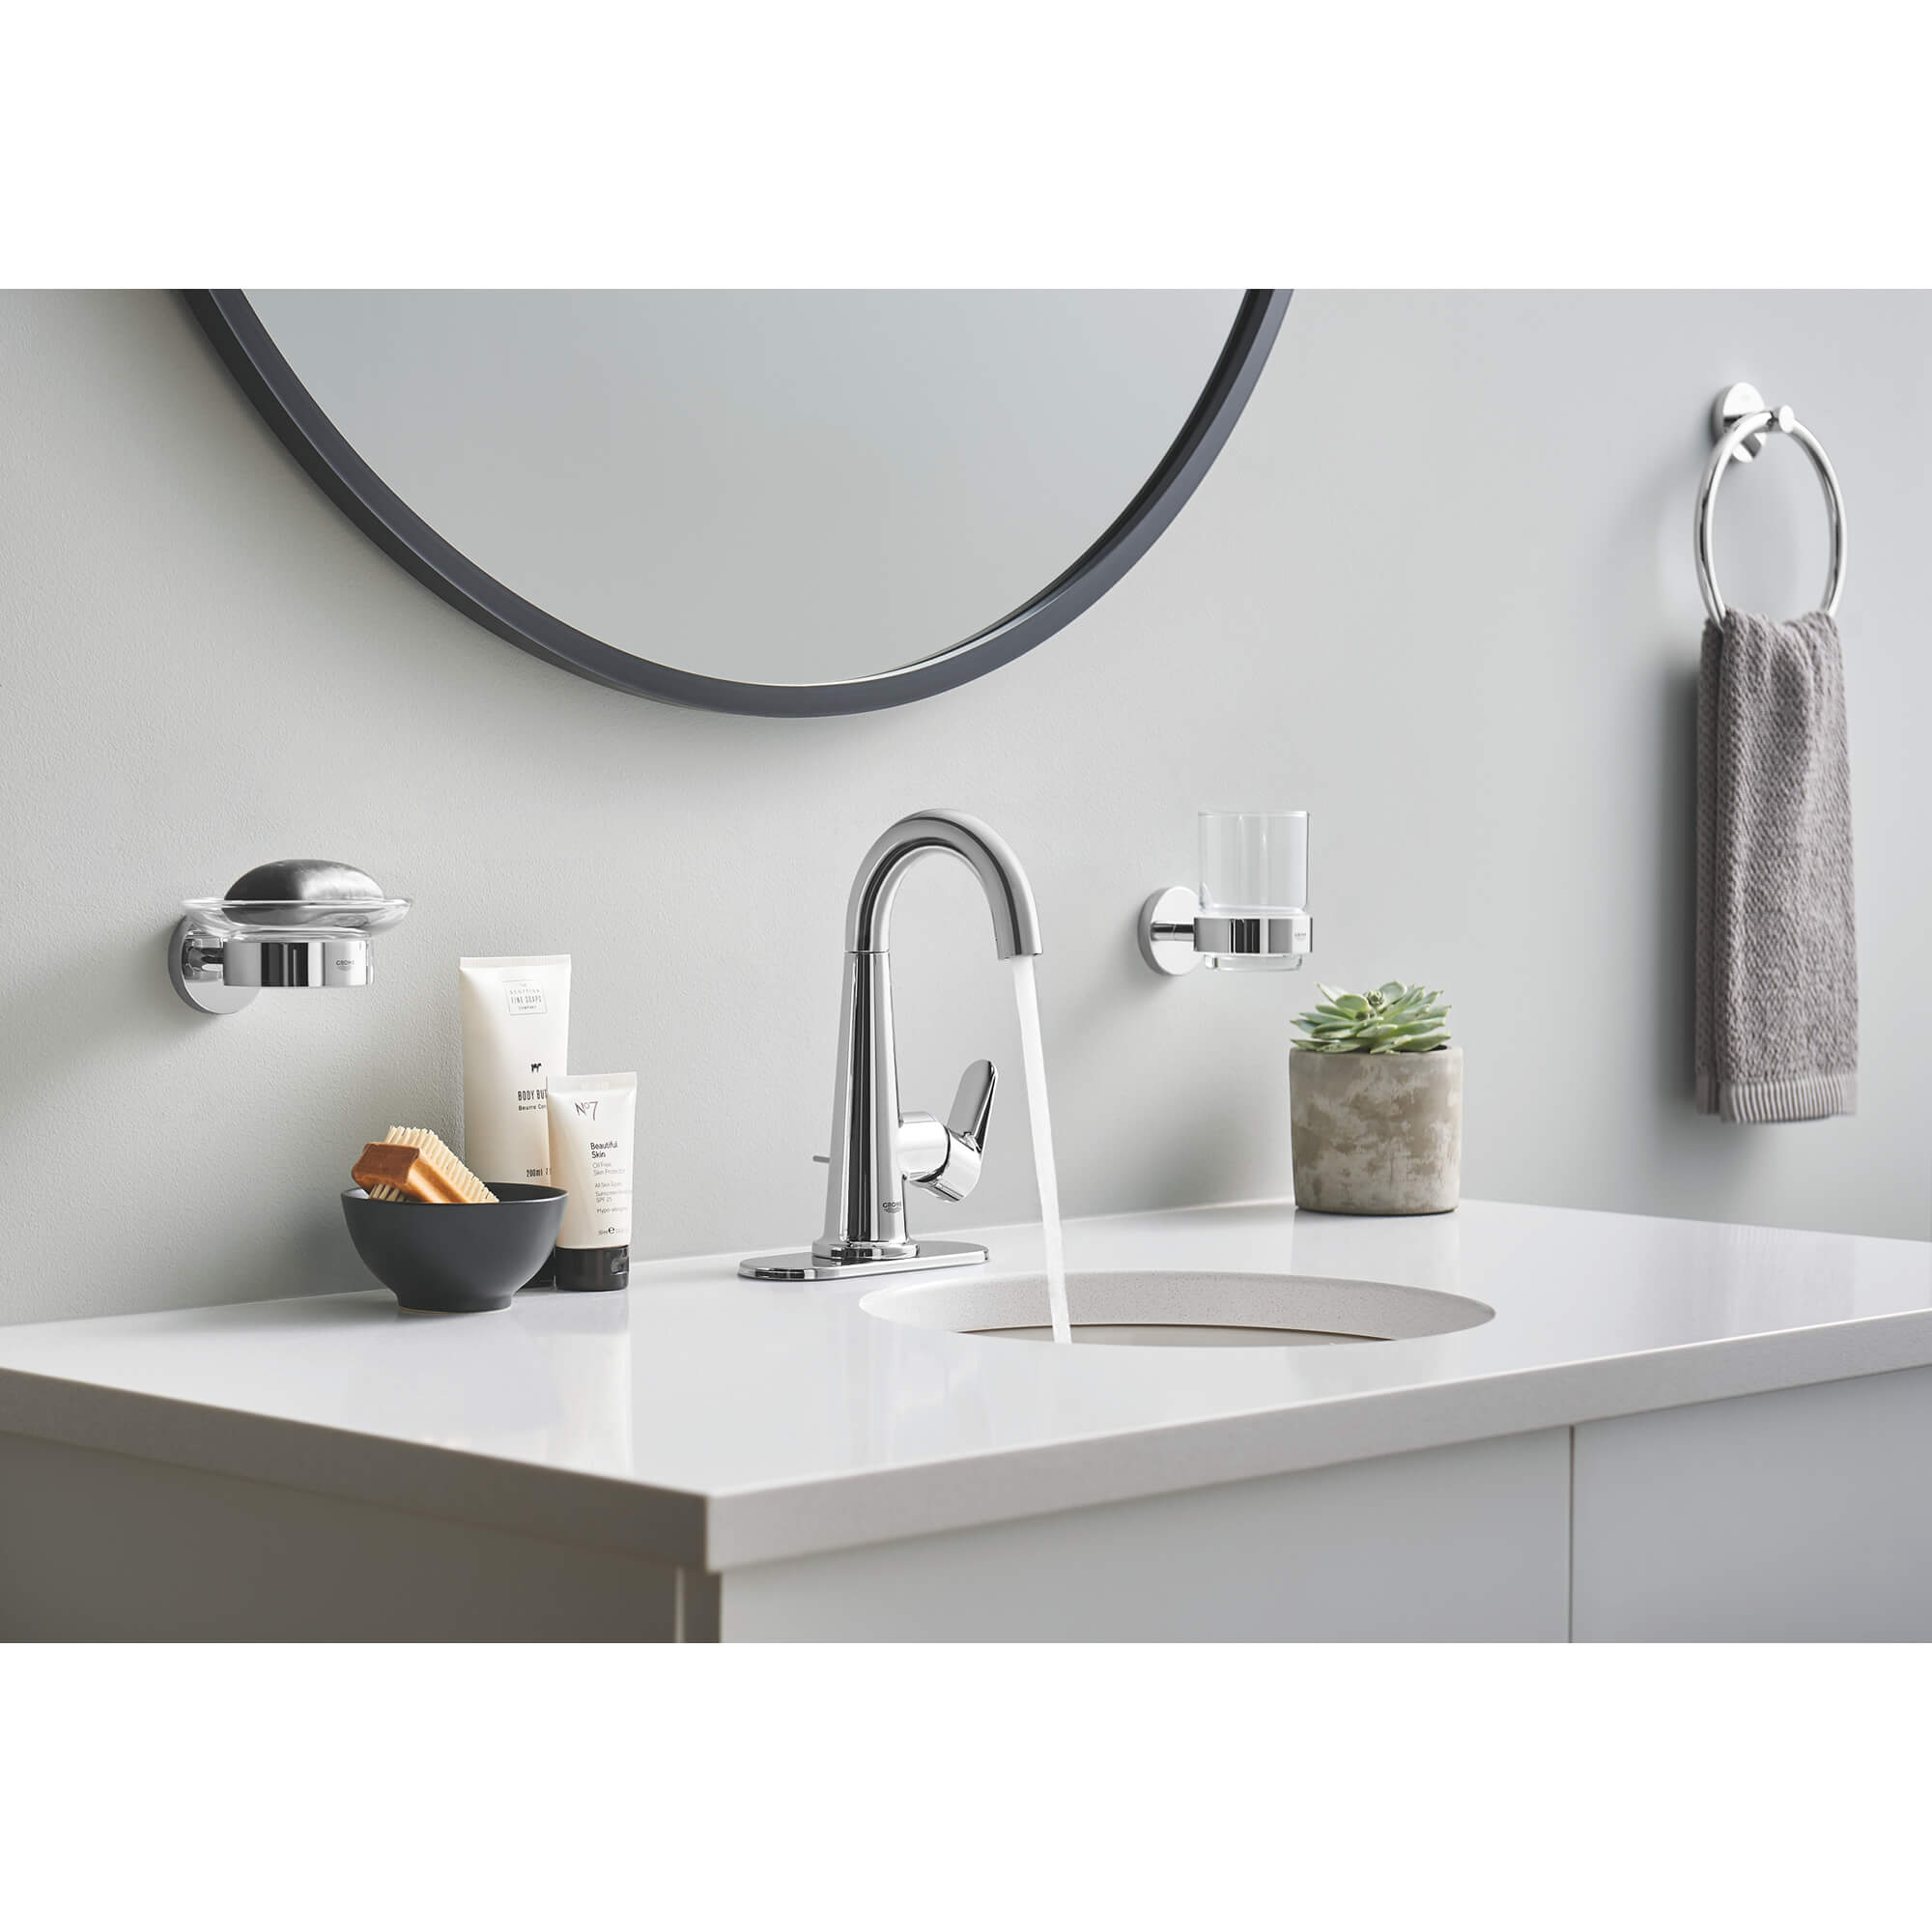 Glass with Holder GROHE CHROME